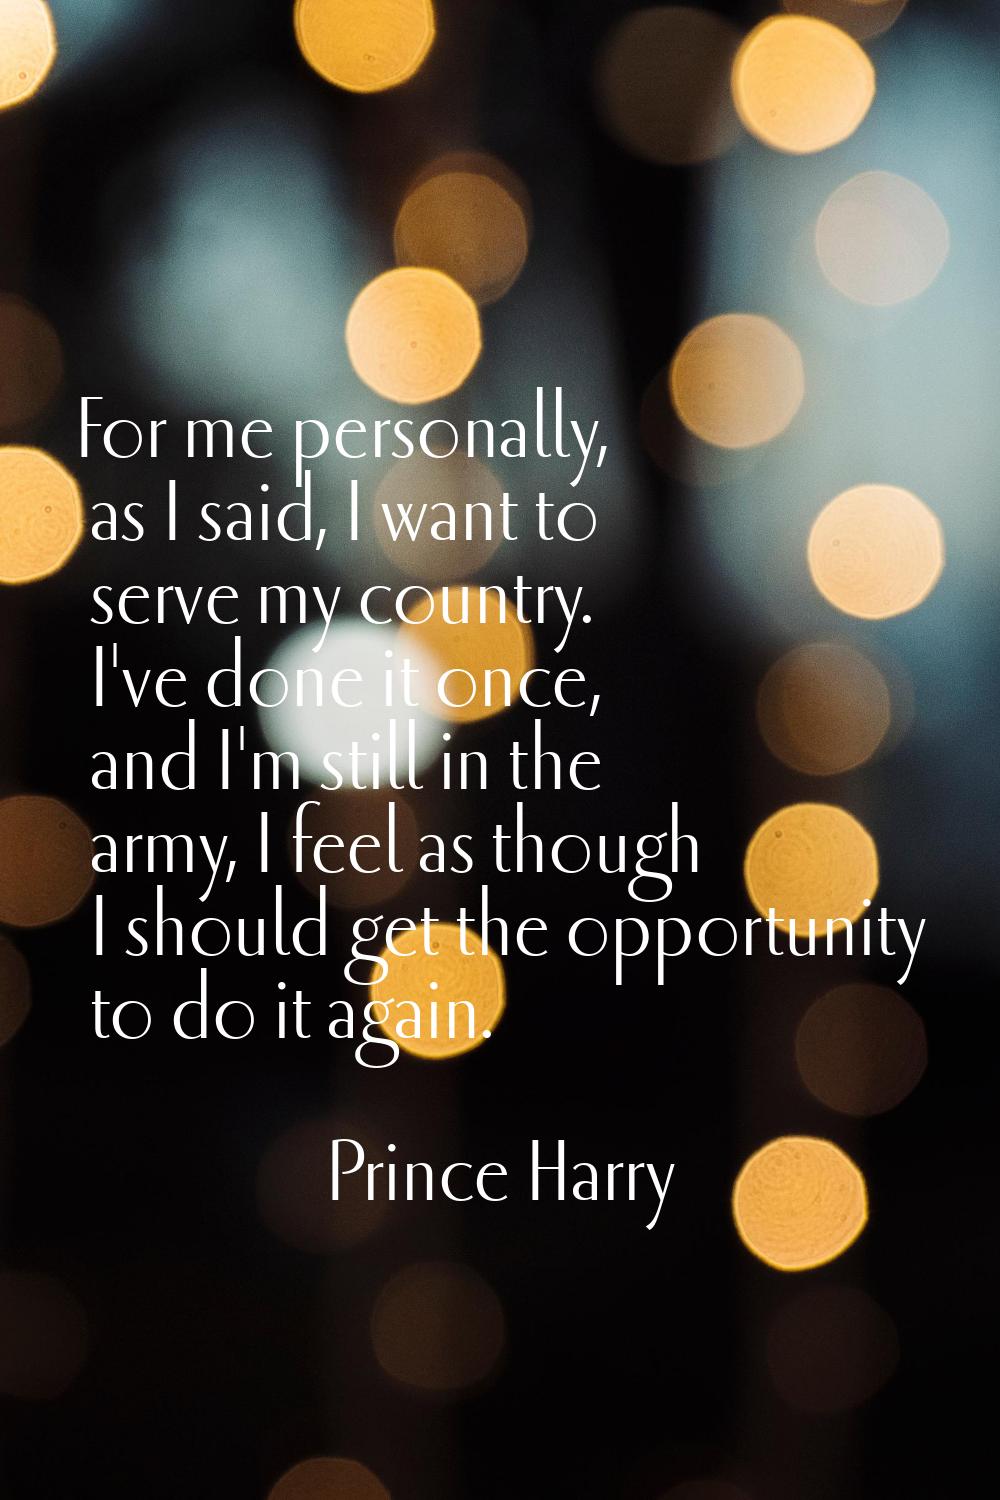 For me personally, as I said, I want to serve my country. I've done it once, and I'm still in the a